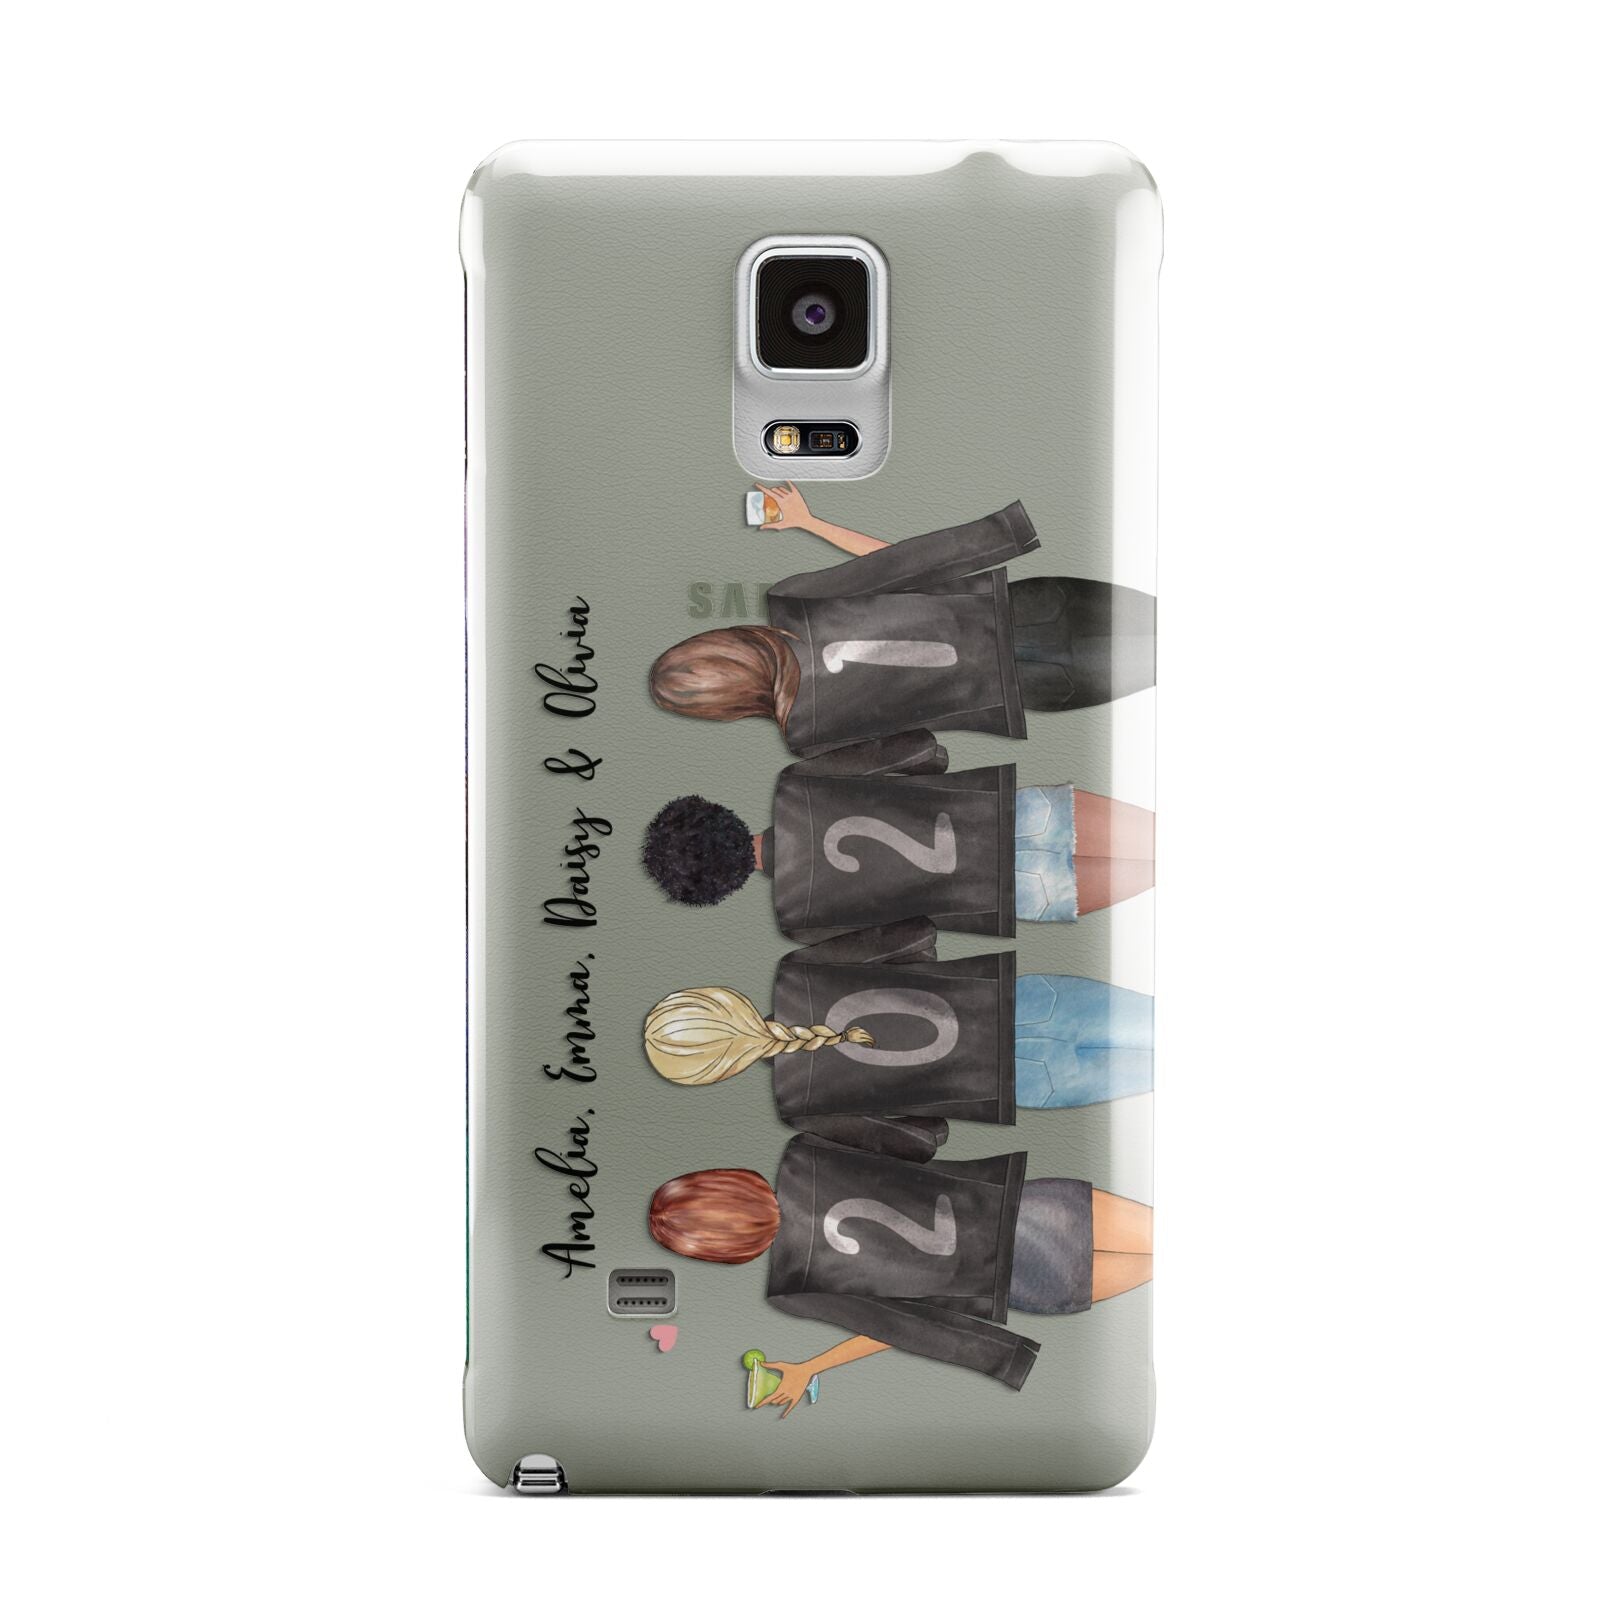 4 Best Friends with Names Samsung Galaxy Note 4 Case